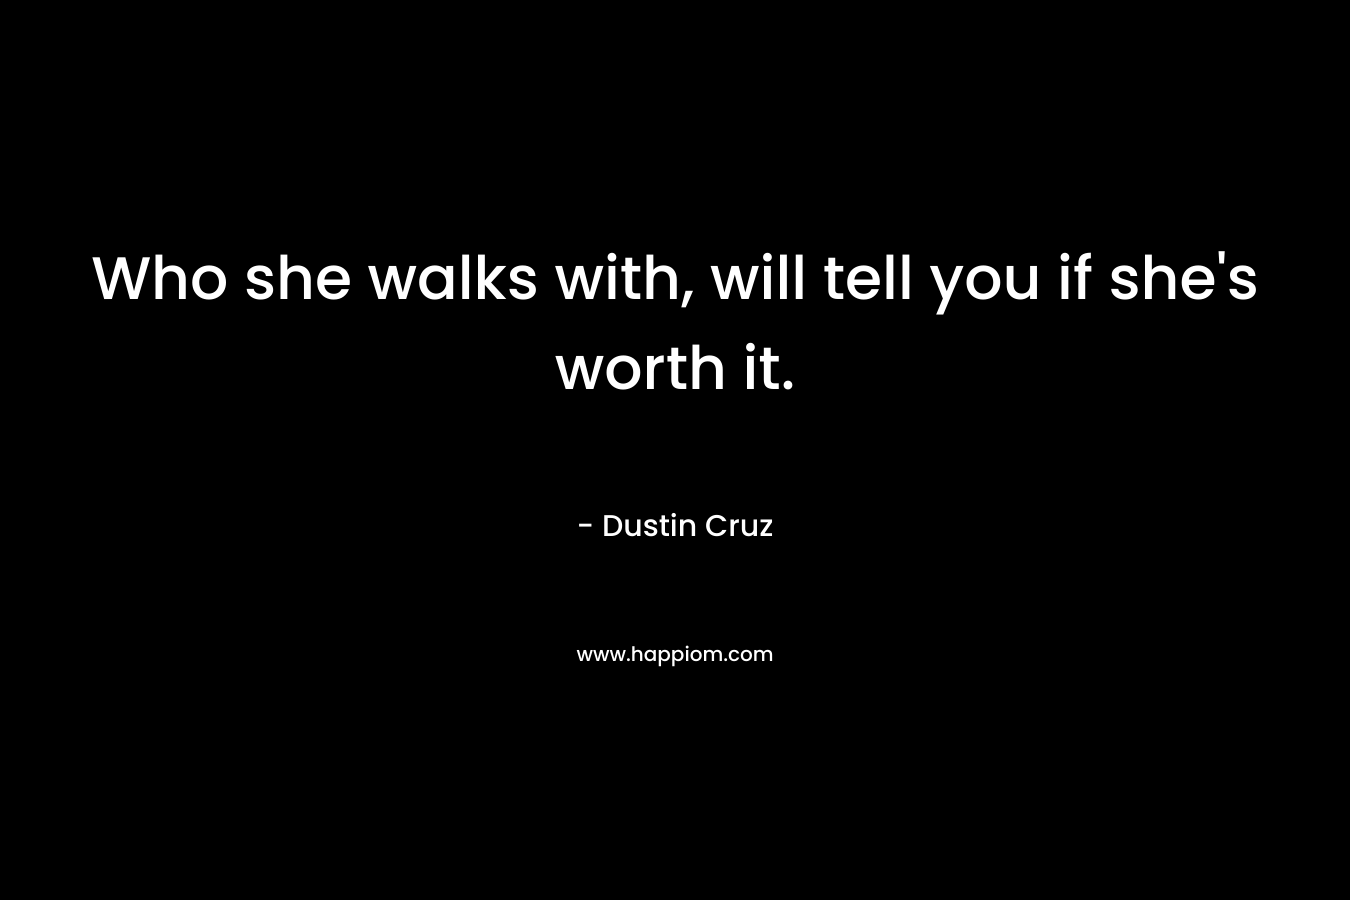 Who she walks with, will tell you if she's worth it.